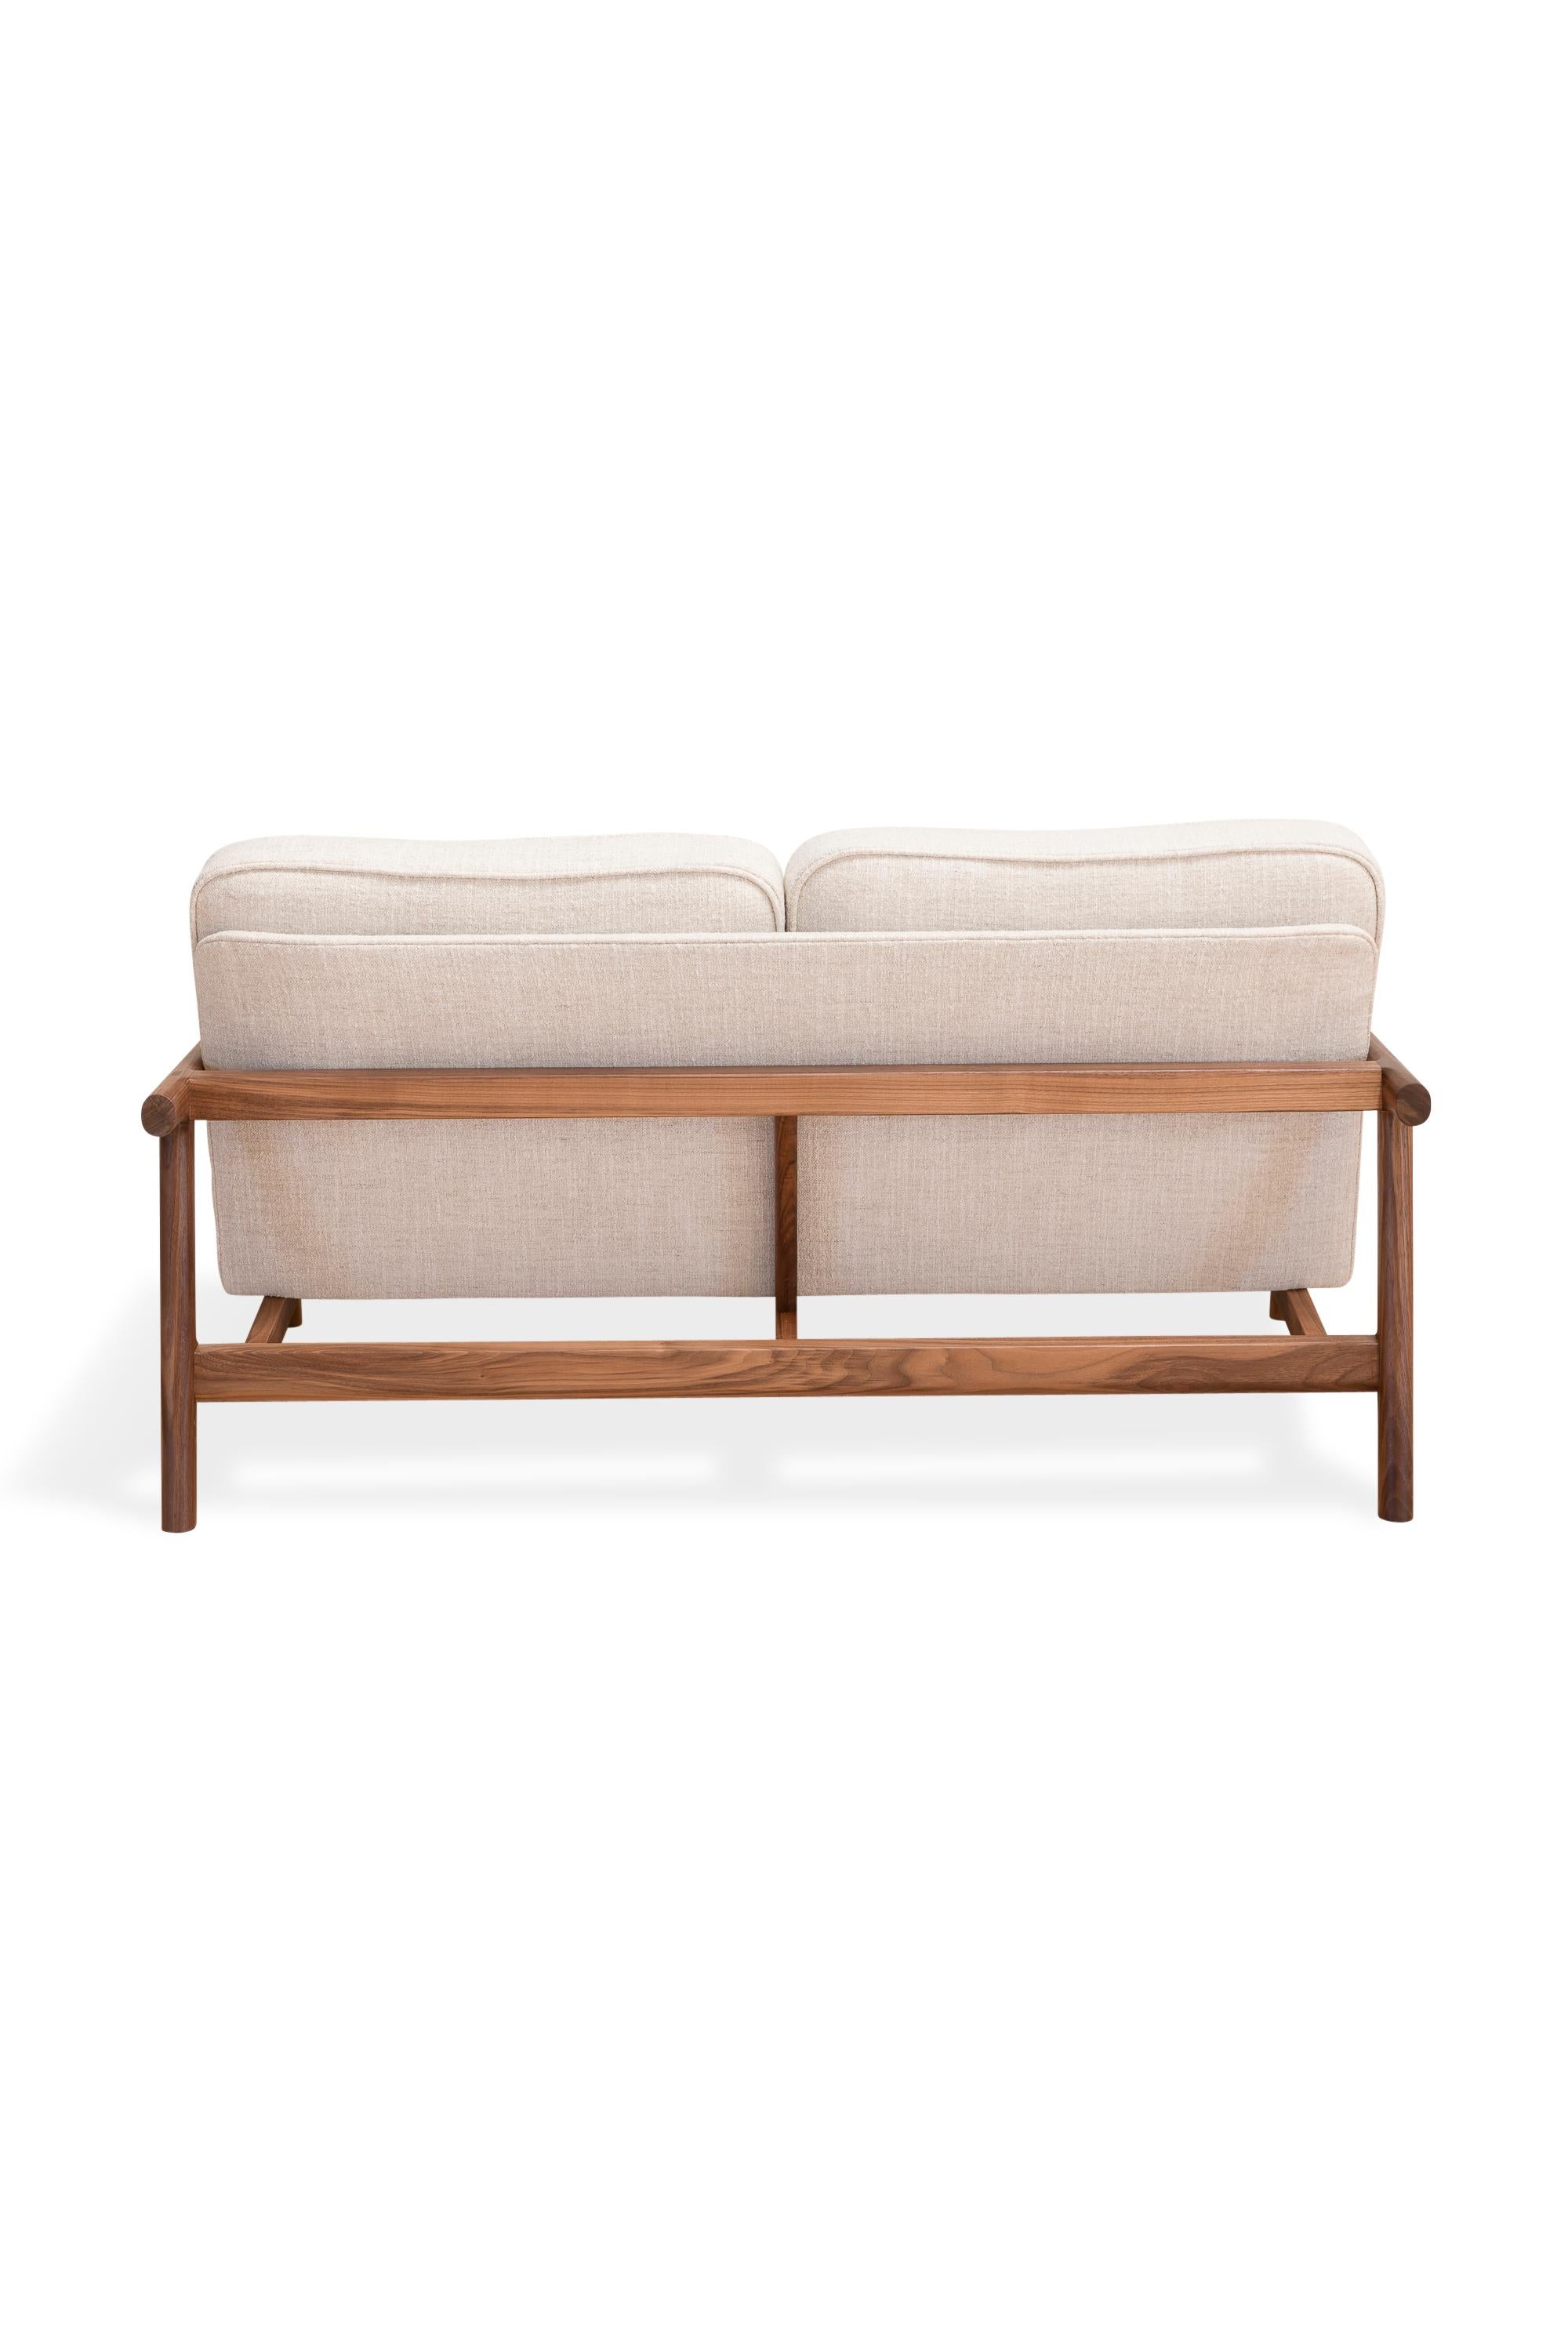 American EARL Handcrafted Walnut Moresby Loveseat with Custom Linen or Leather Upholstery For Sale